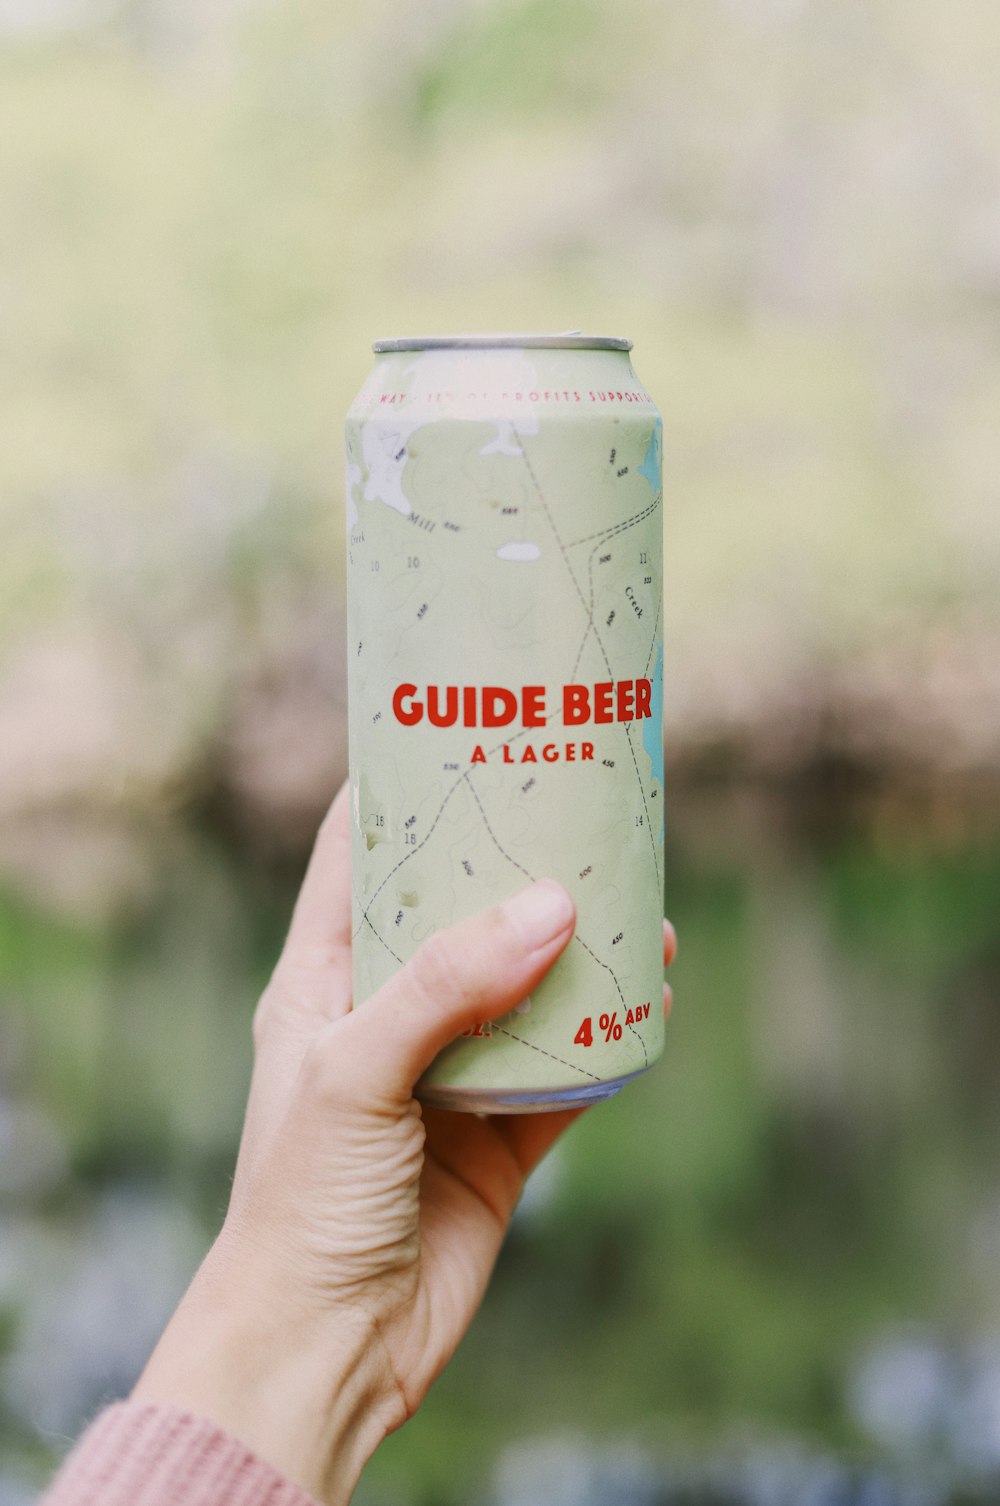 Guide Beer can